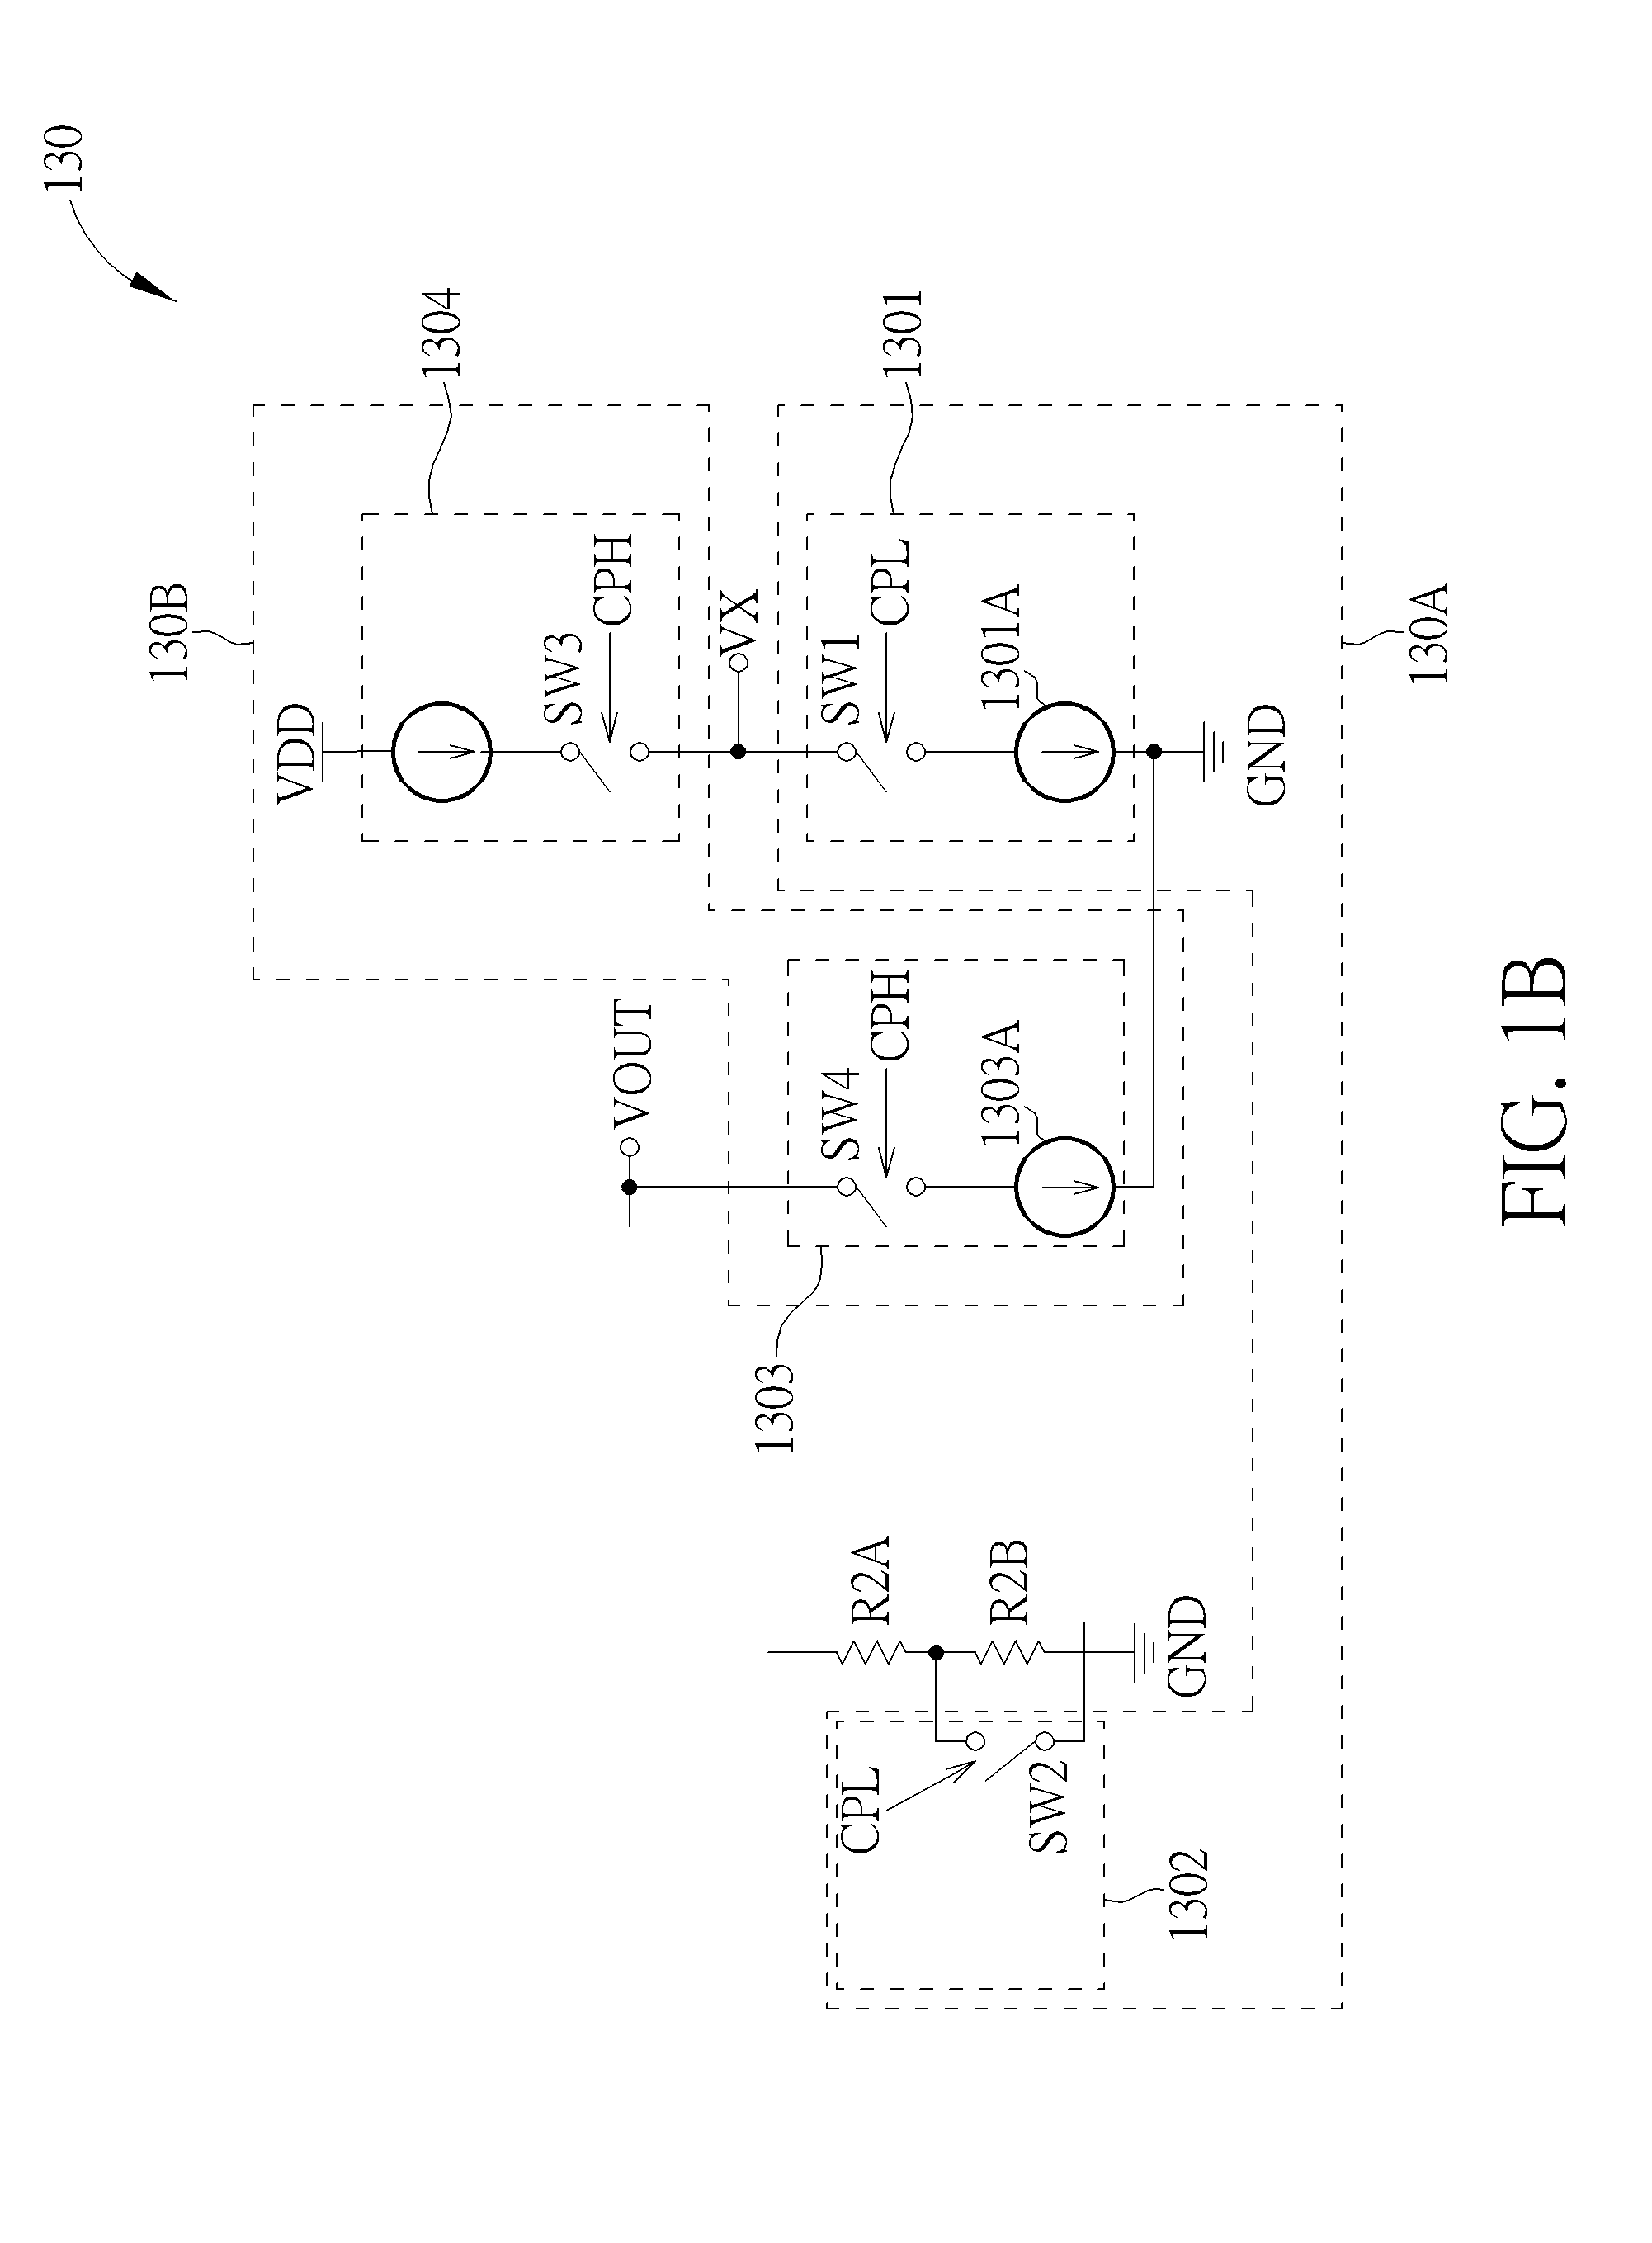 Low-dropout voltage regulator apparatus capable of adaptively adjusting current passing through output transistor to reduce transient response time and related method thereof